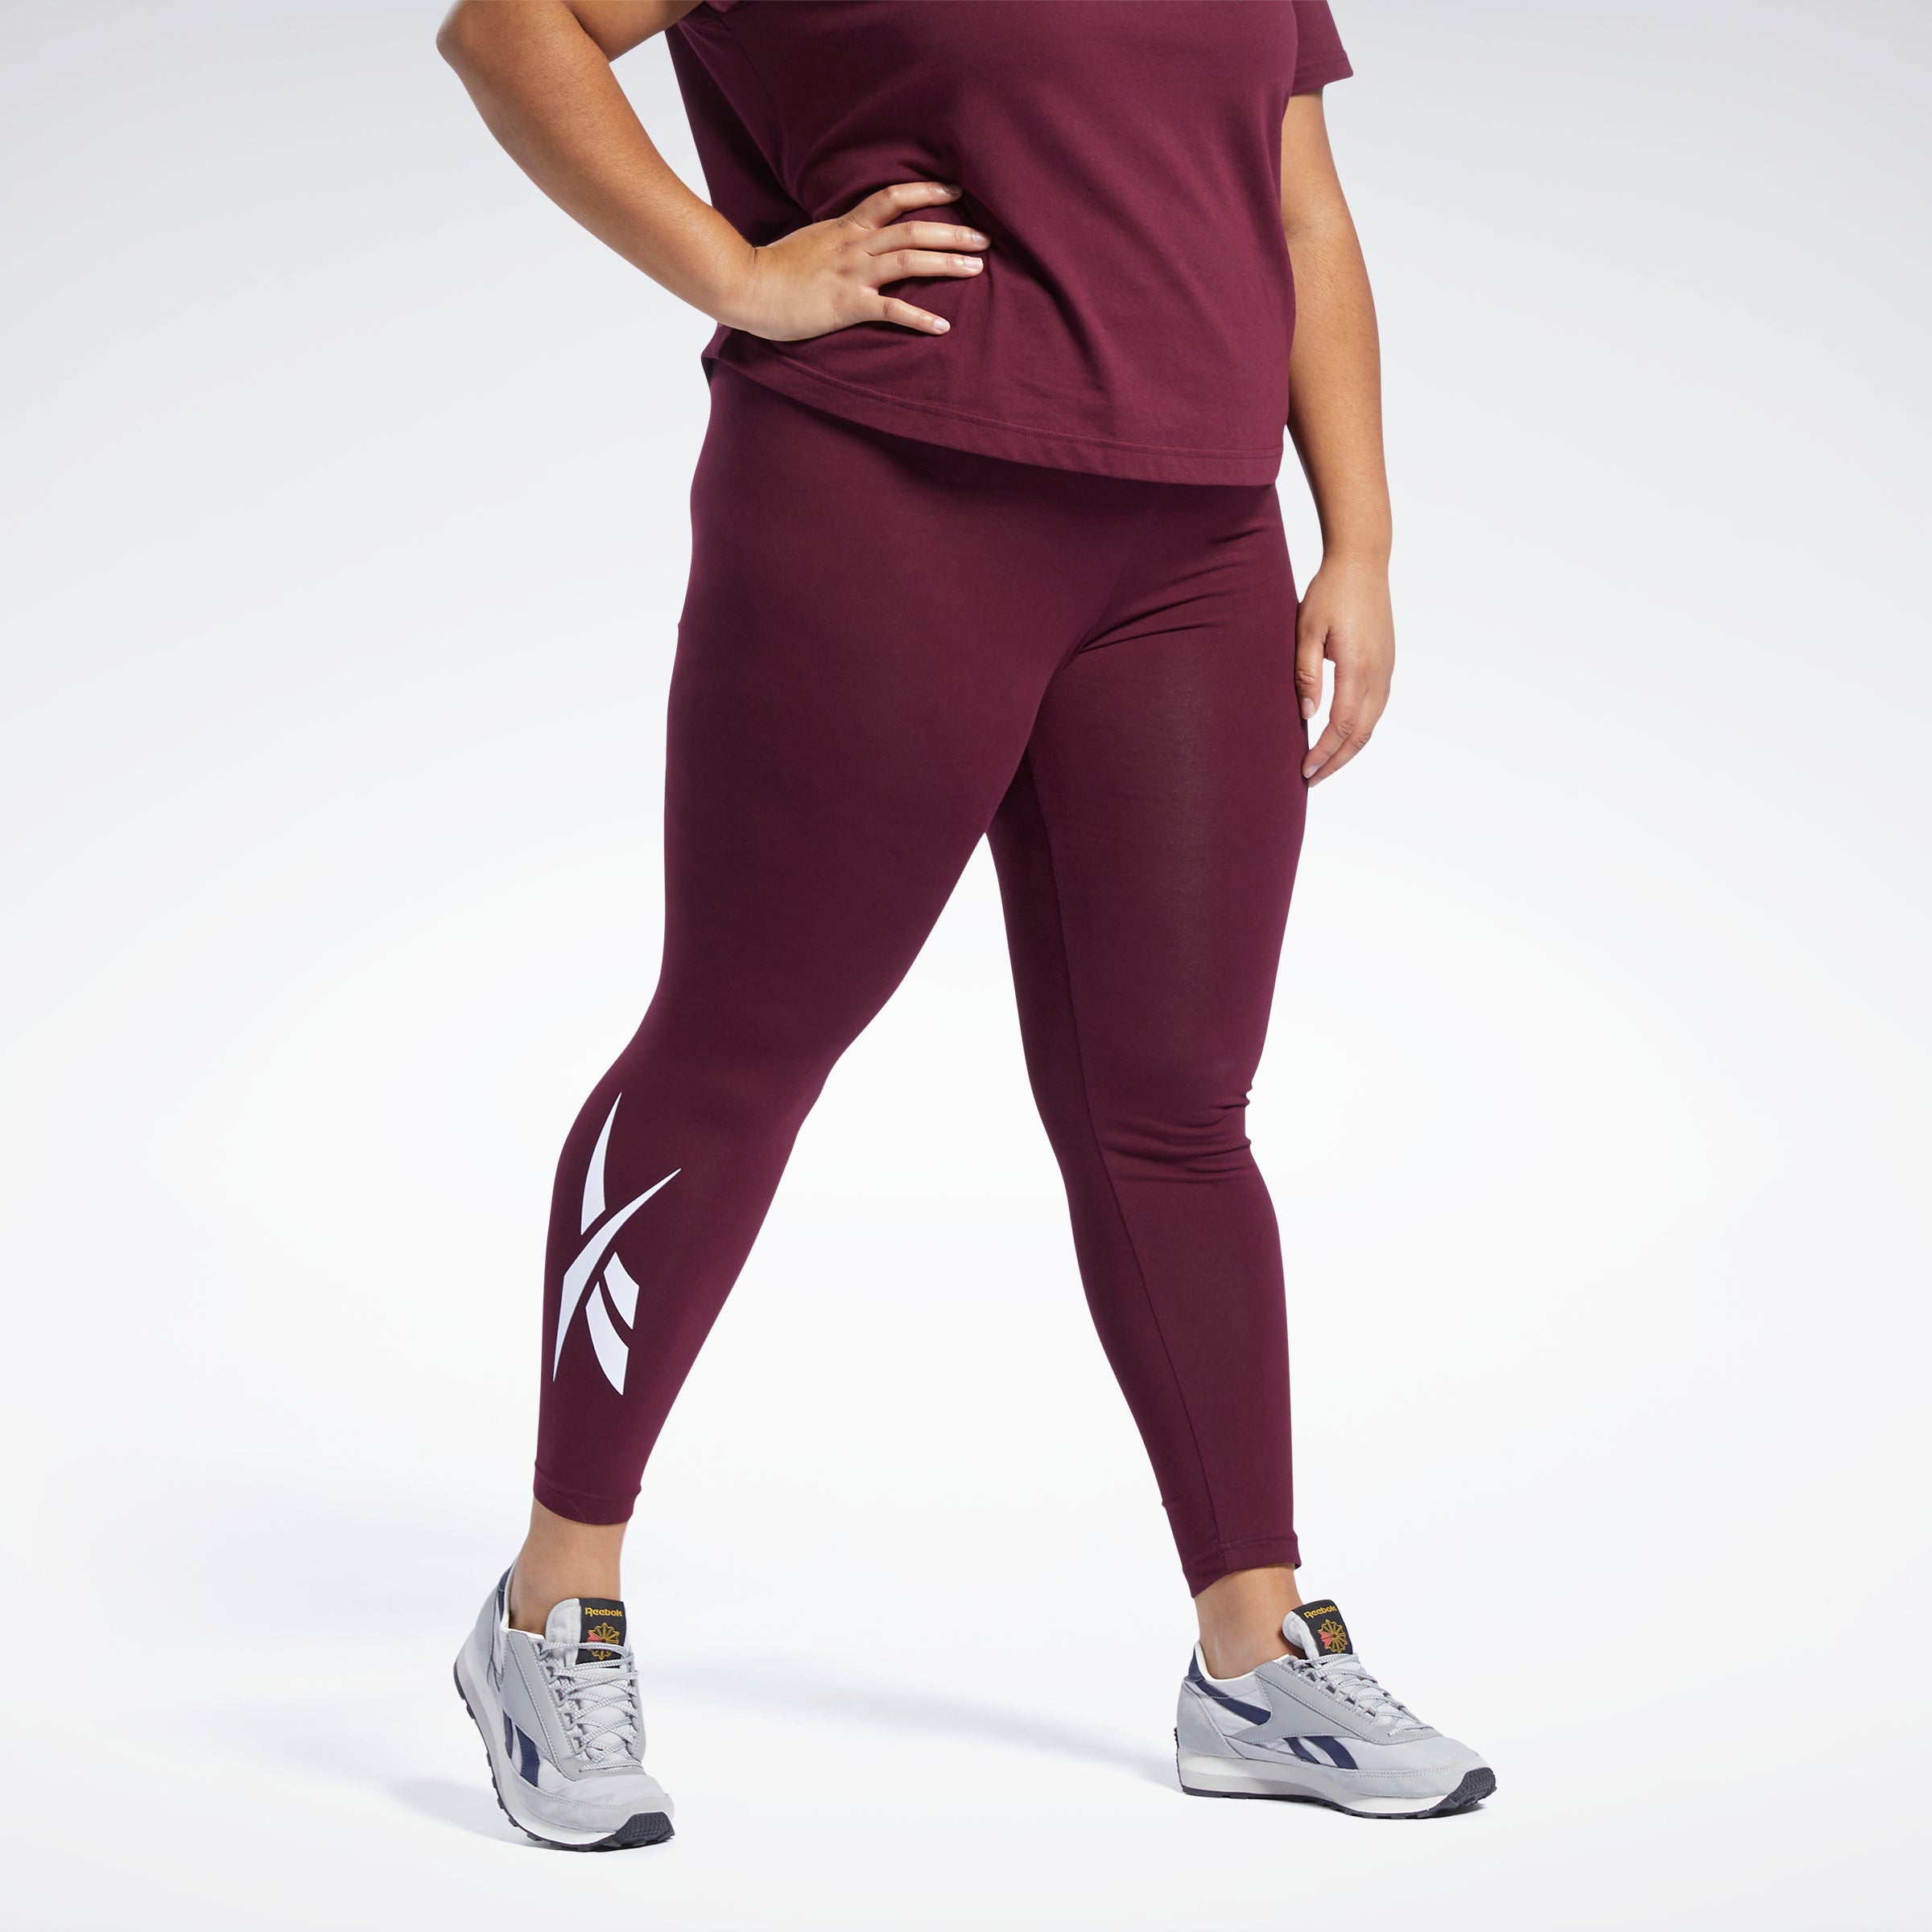 Reebok Womens Lux Compression Athletic Pants Size 4X Maroon New